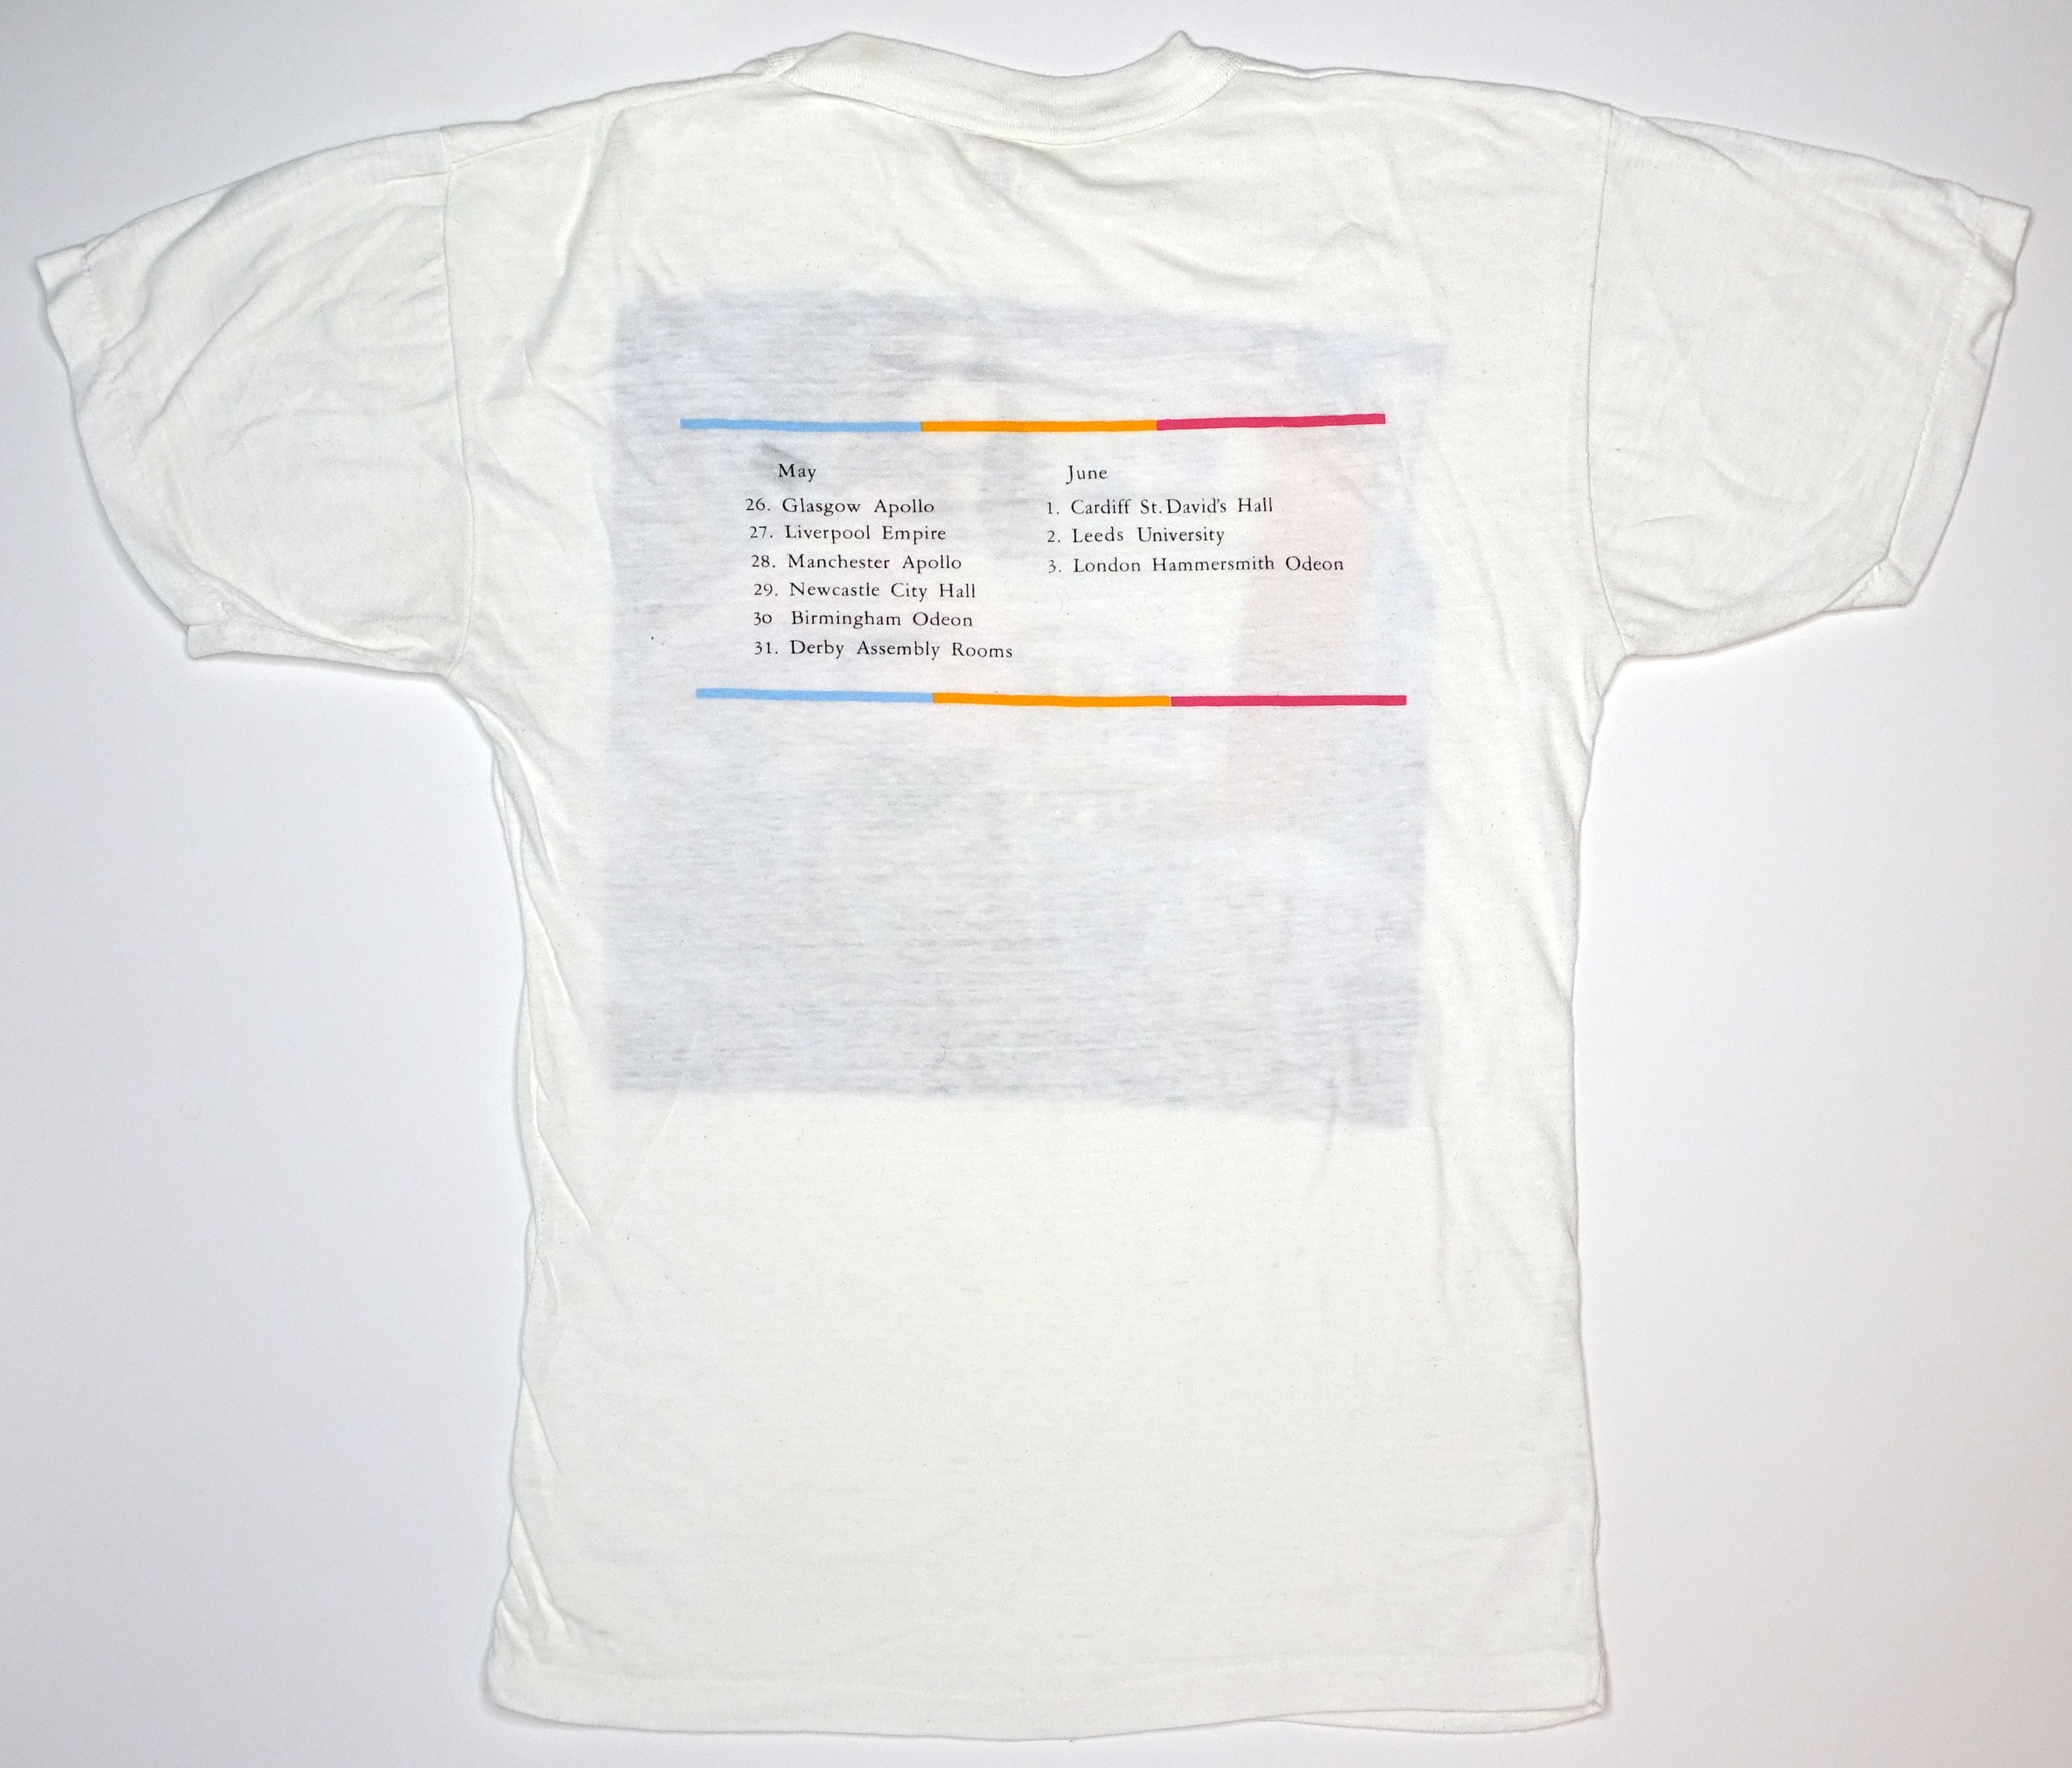 Orchestral Manoeuvres In The Dark (OMD) - Locomotion 1984 UK Tour Shirt Size Large